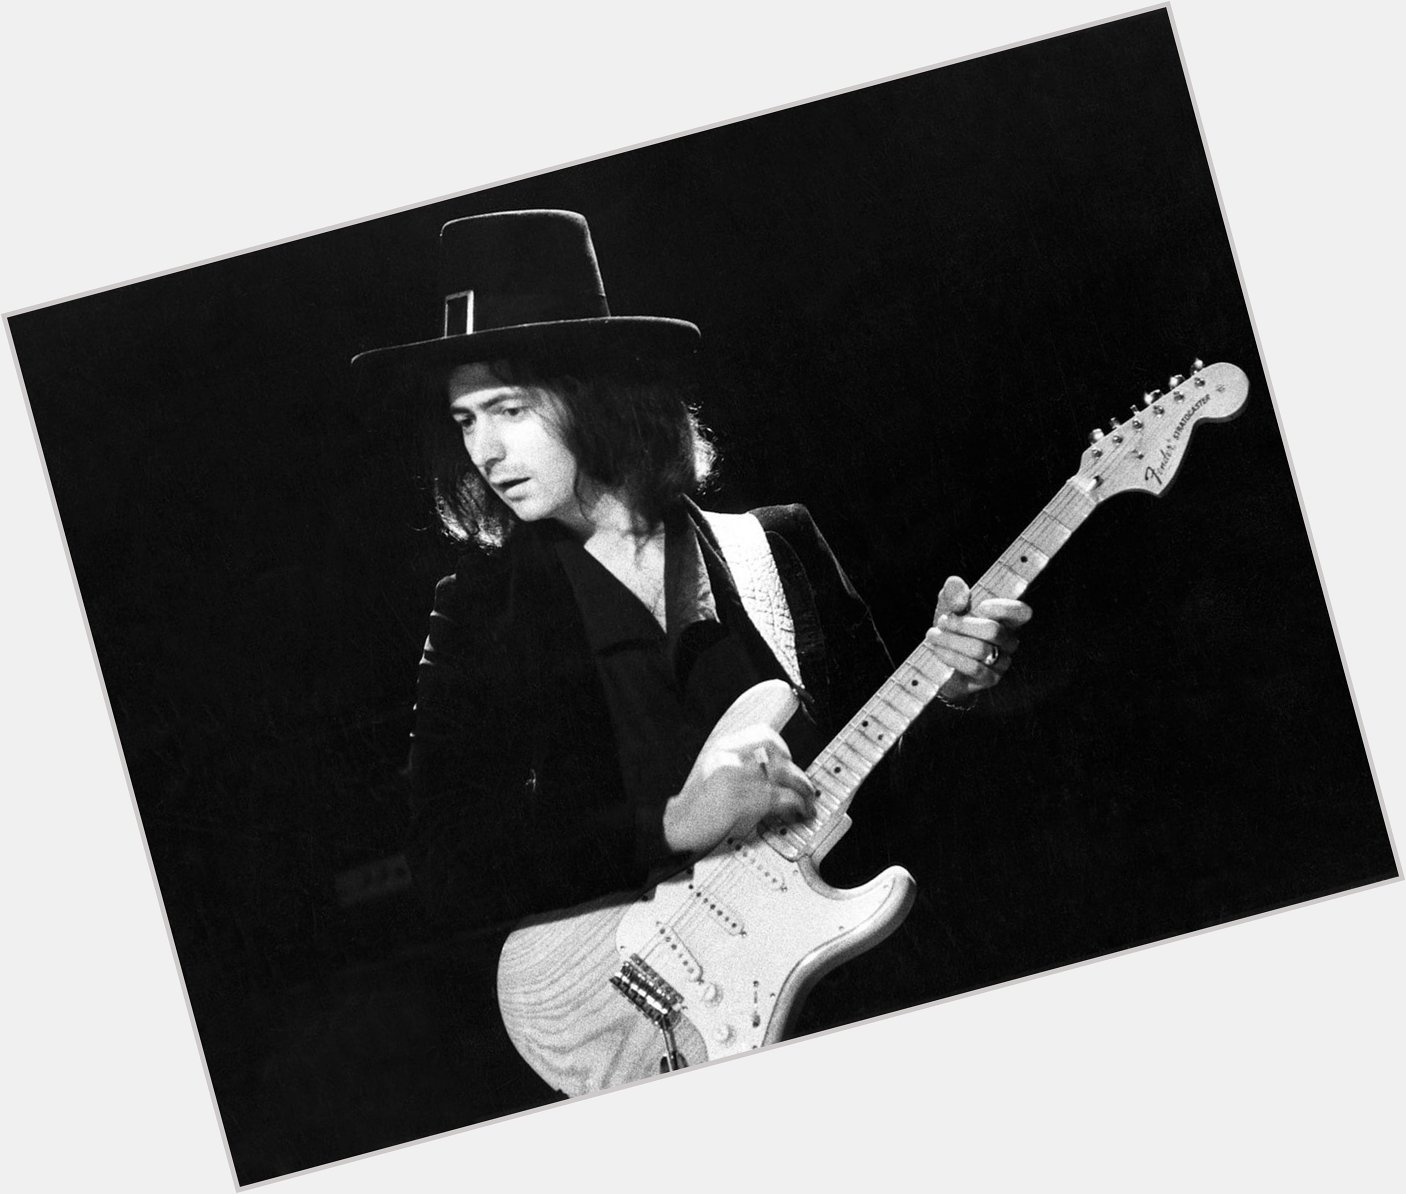 Happy 76th birthday to the great Ritchie Blackmore Born on this day in 1945  